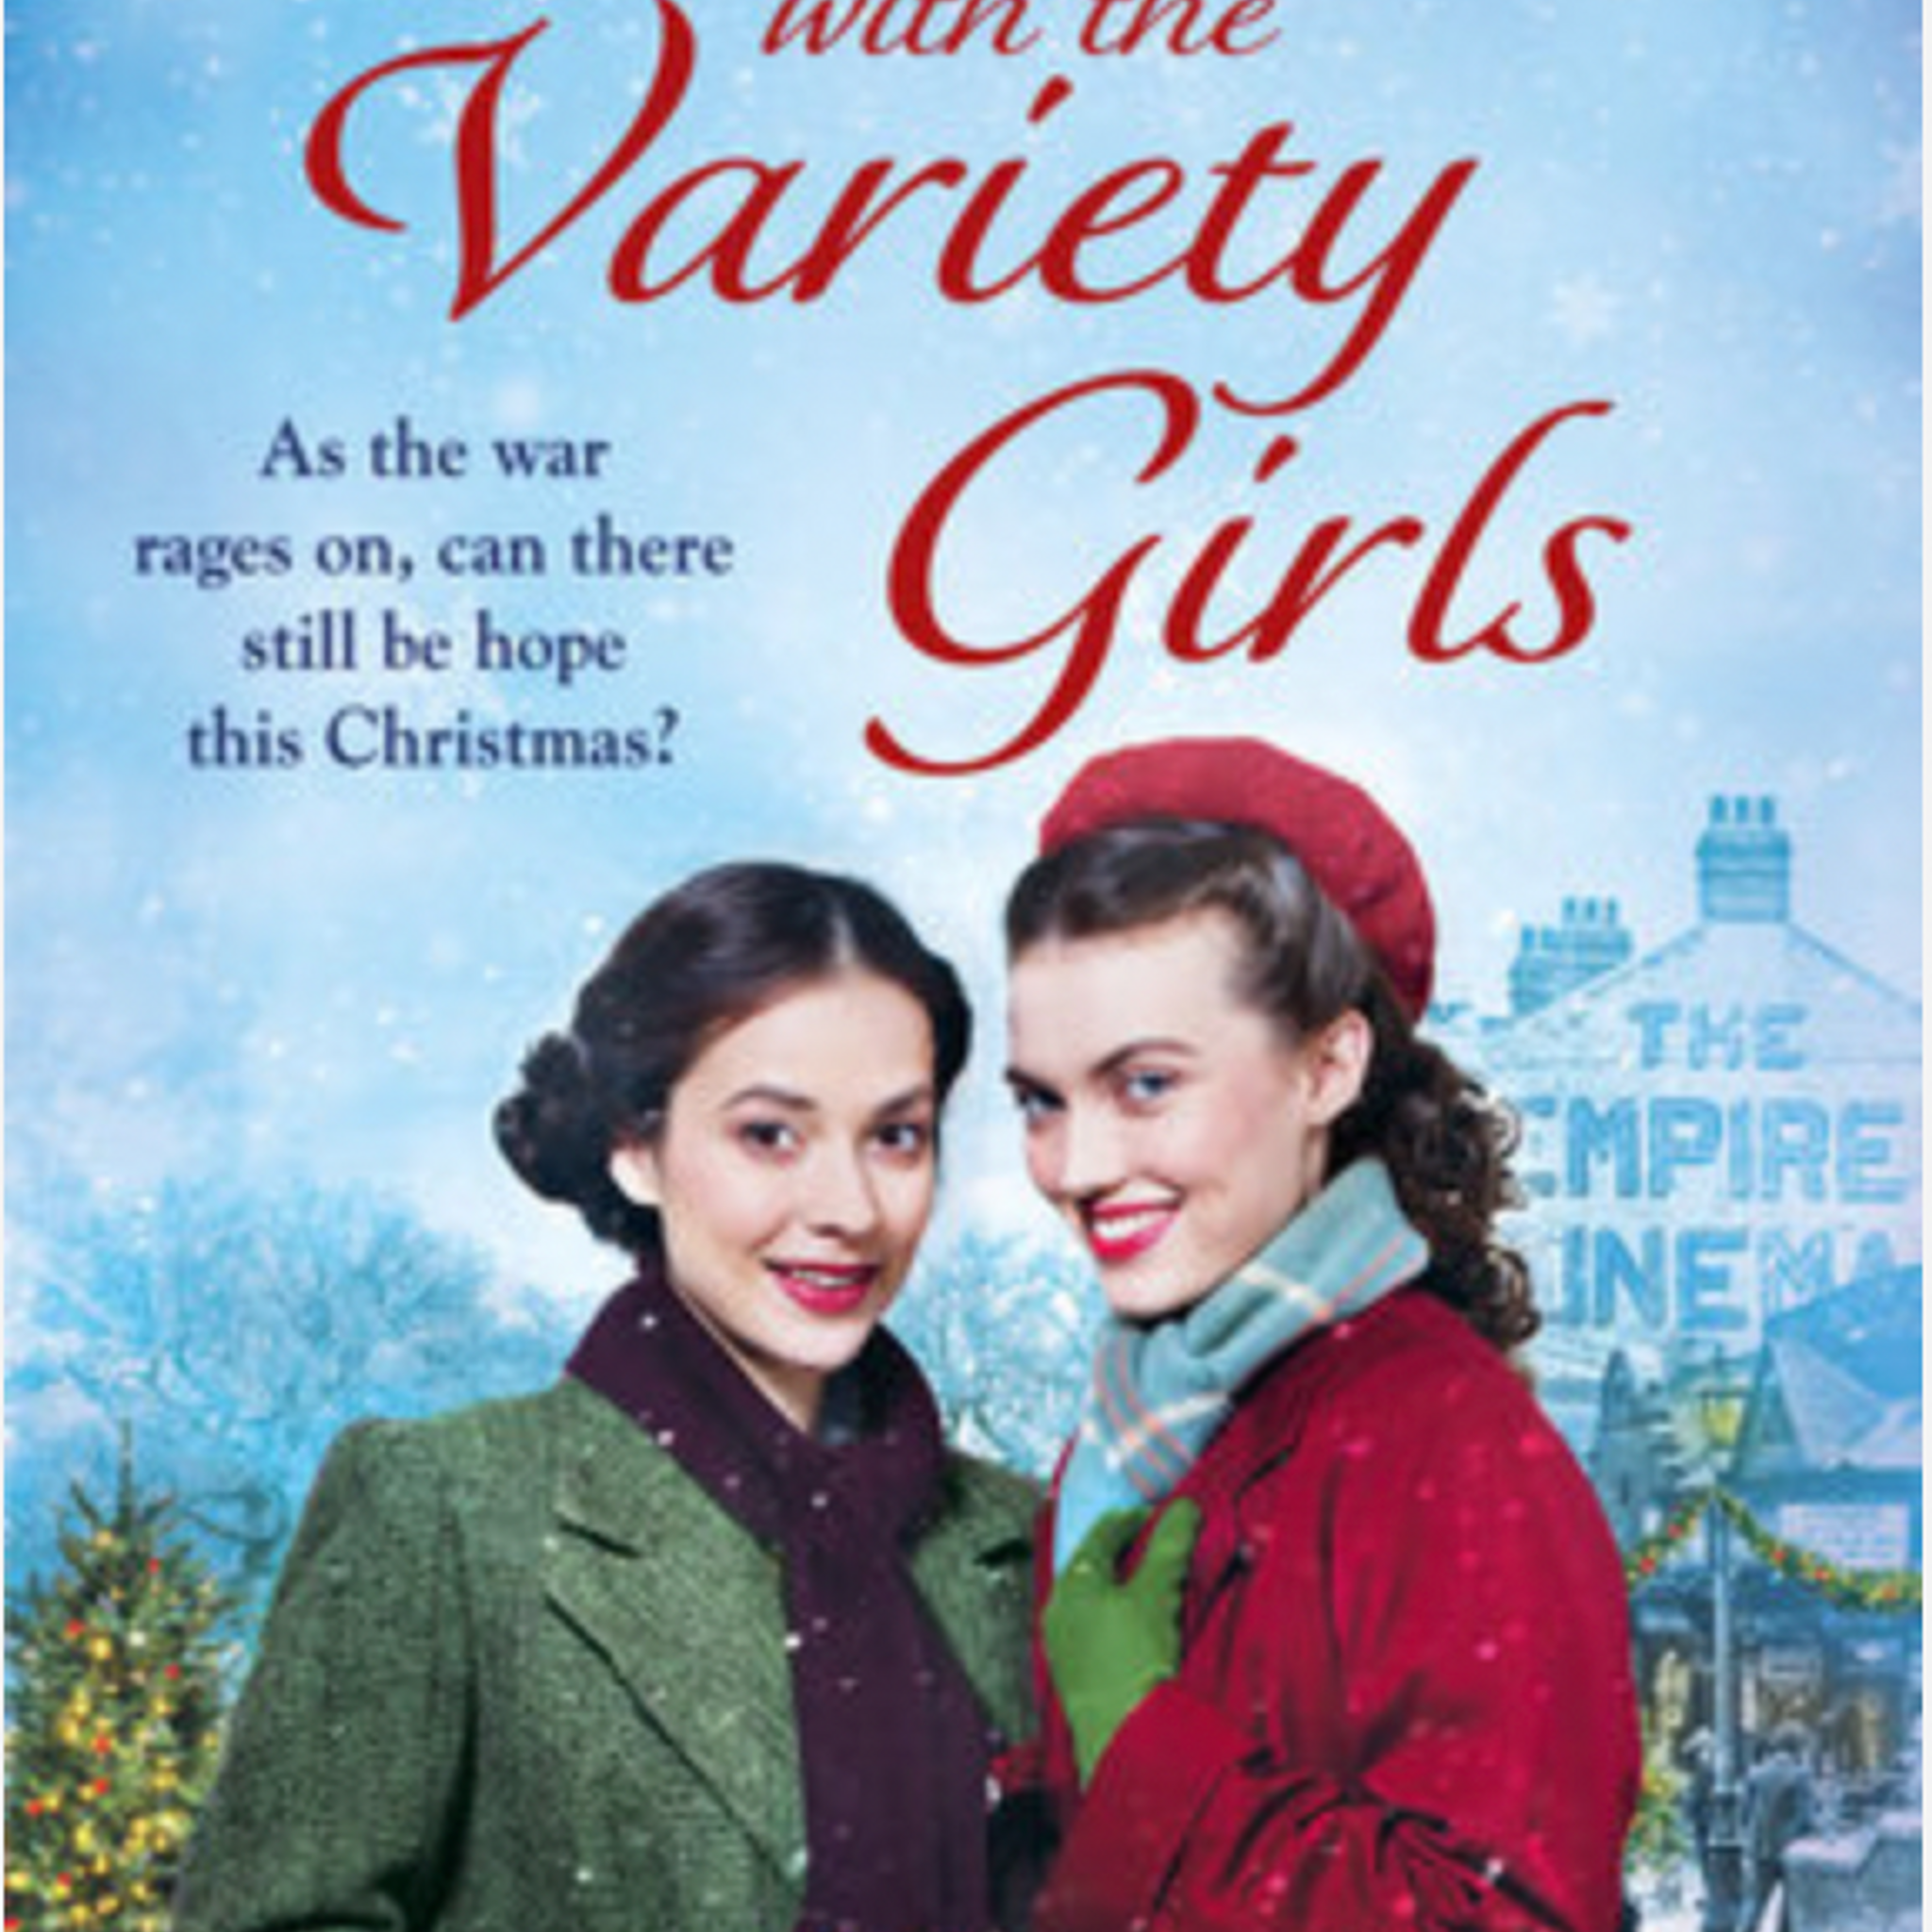 Christmas with the Variety Girls by Tracy Baines